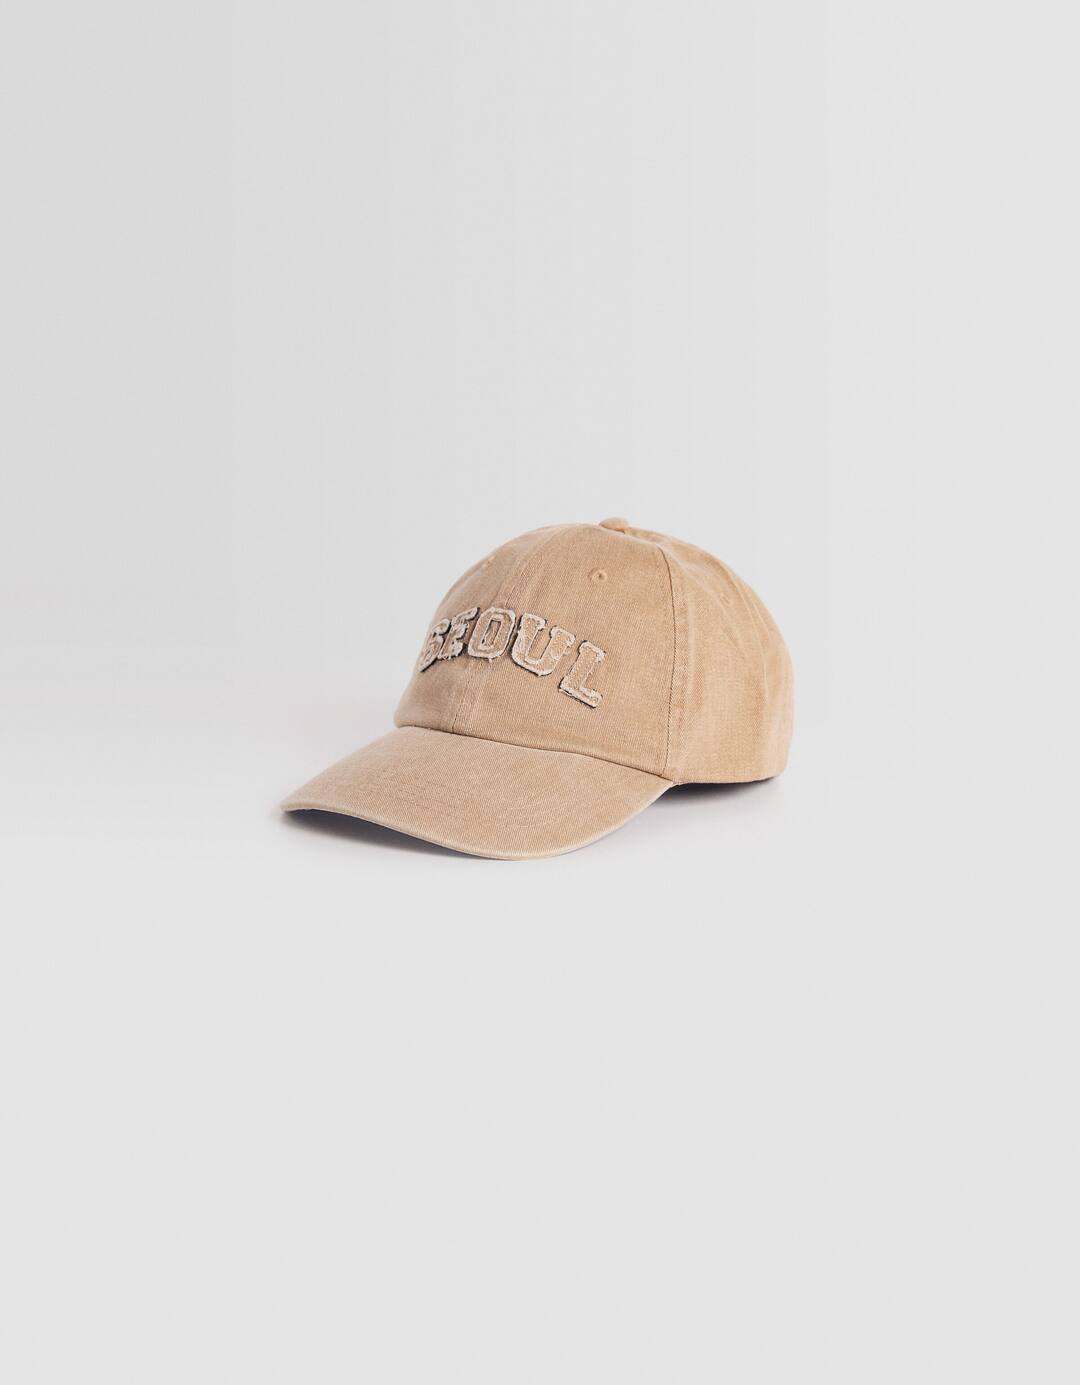 Seoul faded cap with patch